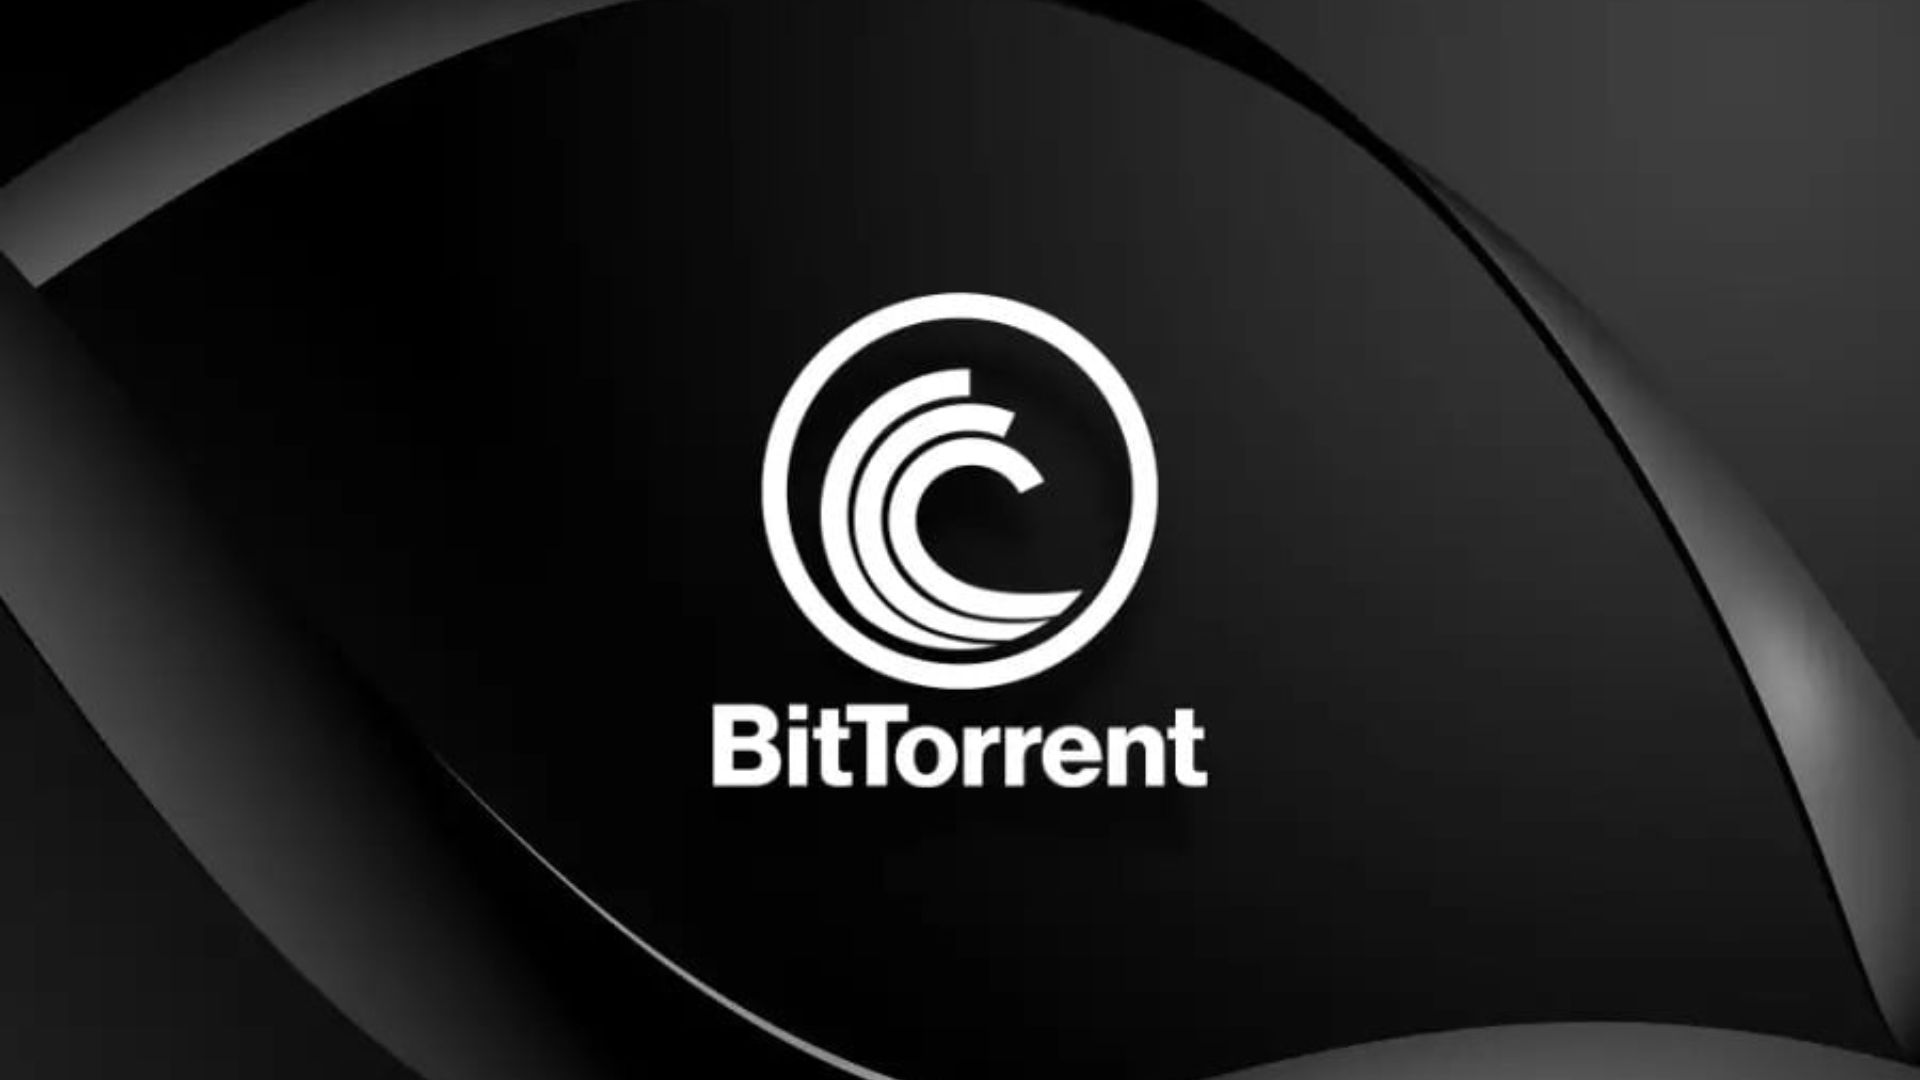 BitTorrent Price Prediction: BTT Keeps Pumping With A 21% Jump As This New Coin Races To $3 Million In Presale